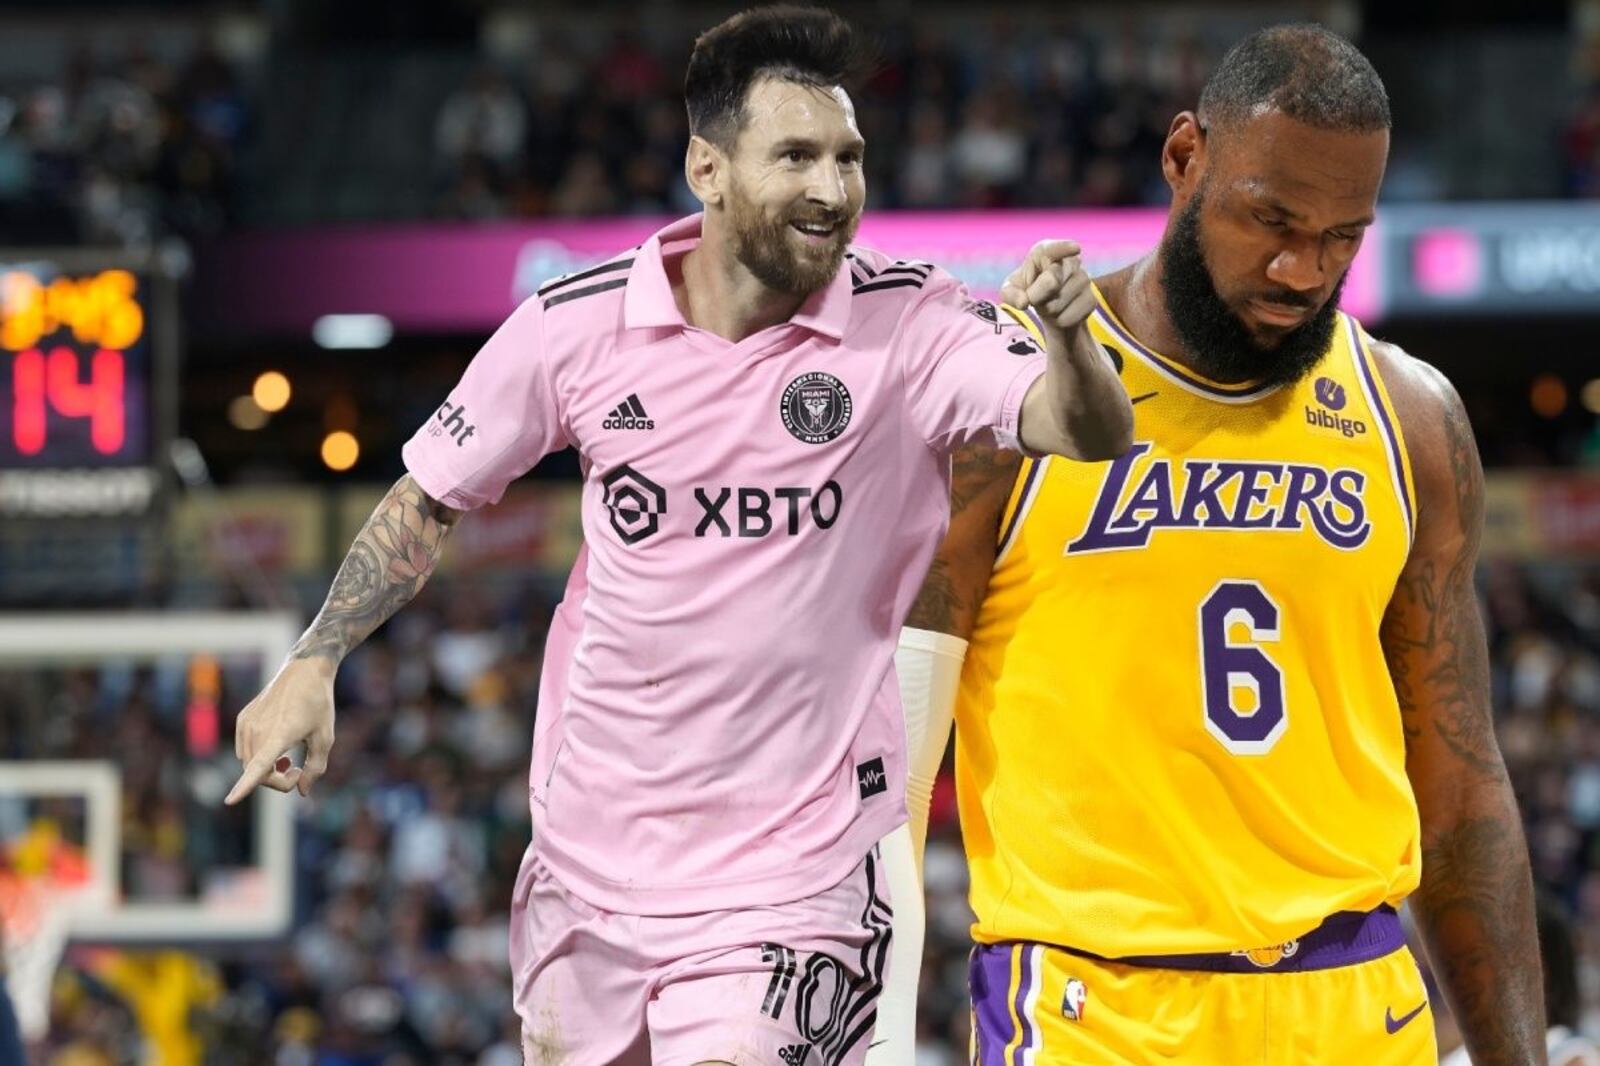 Surprising the USA, Lionel Messi surpassed LeBron James in an important ranking